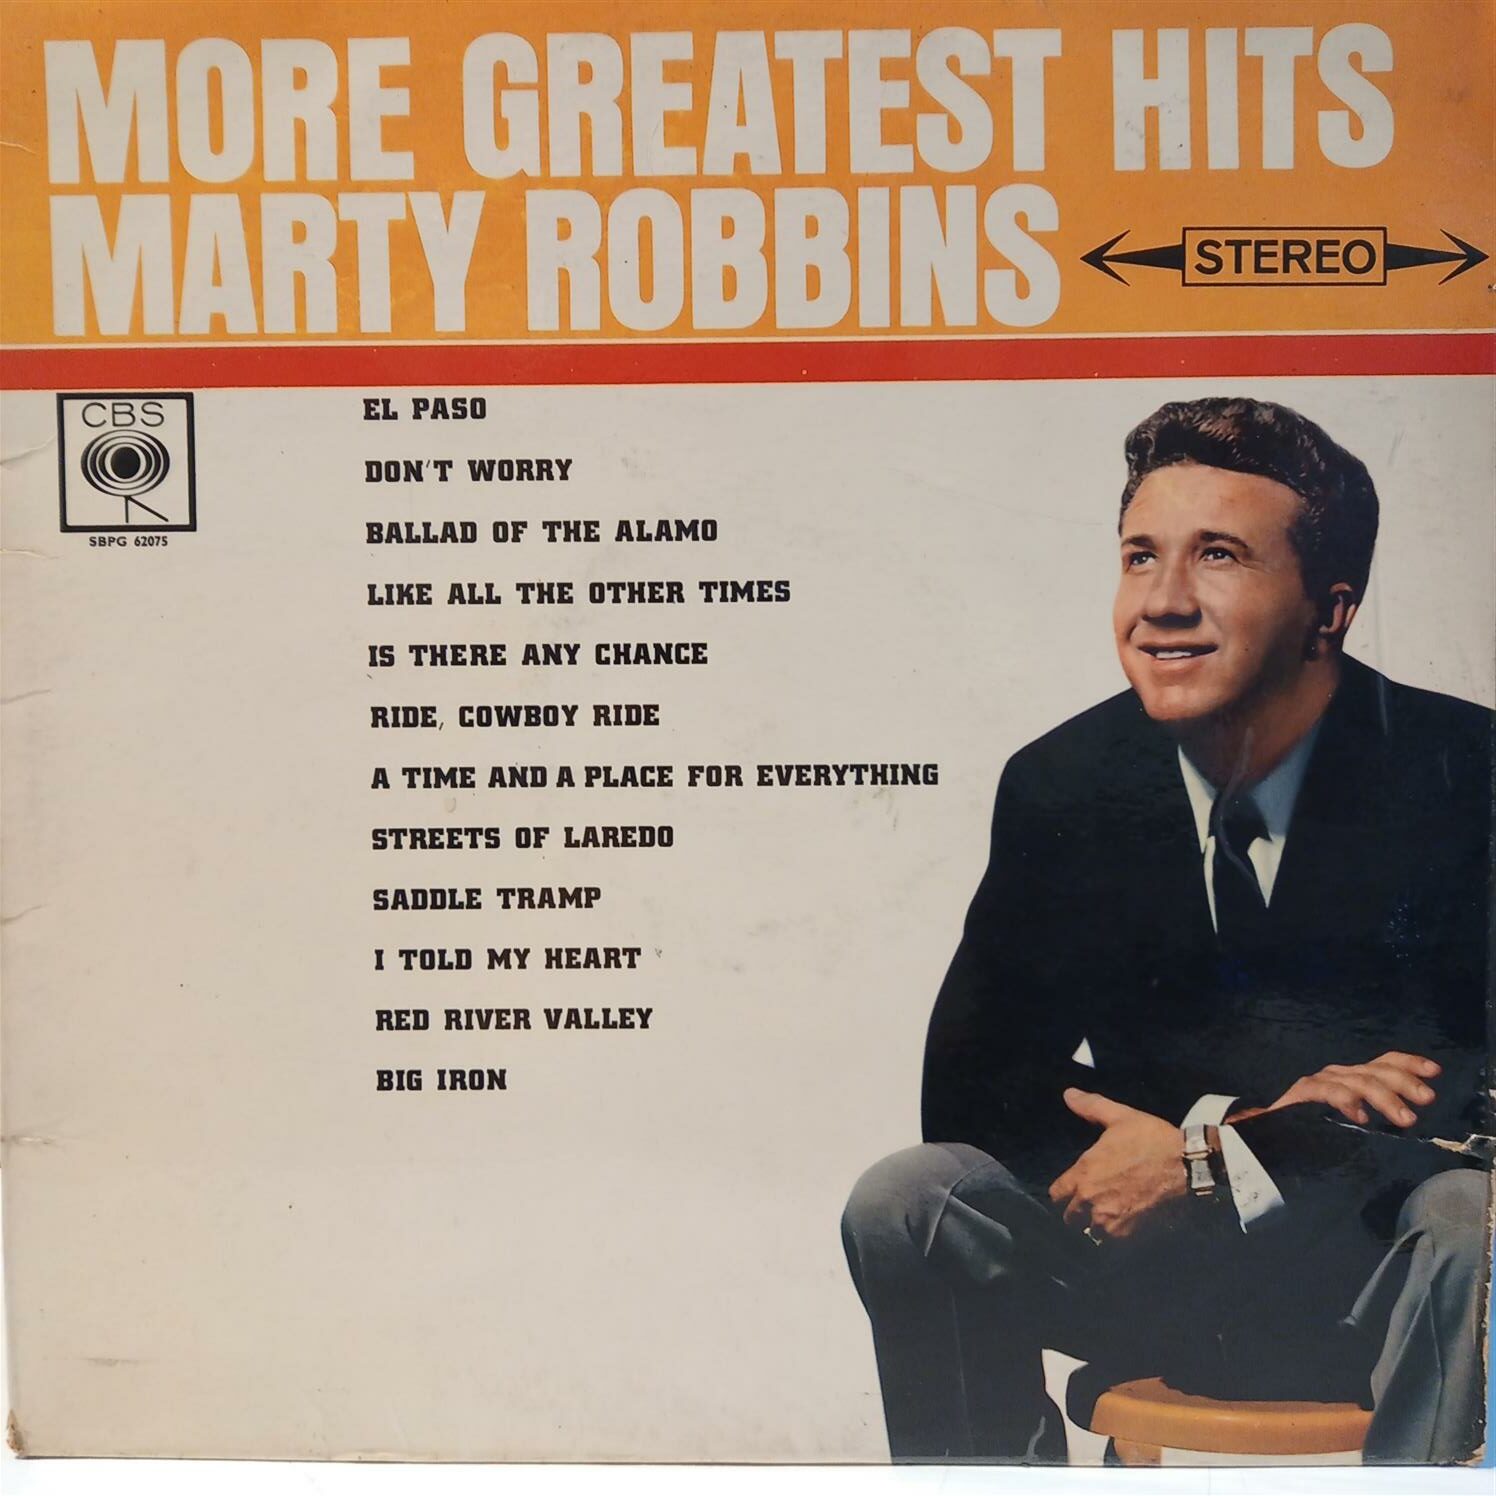 MARTY ROBBINS – MORE GREATEST HITS ON